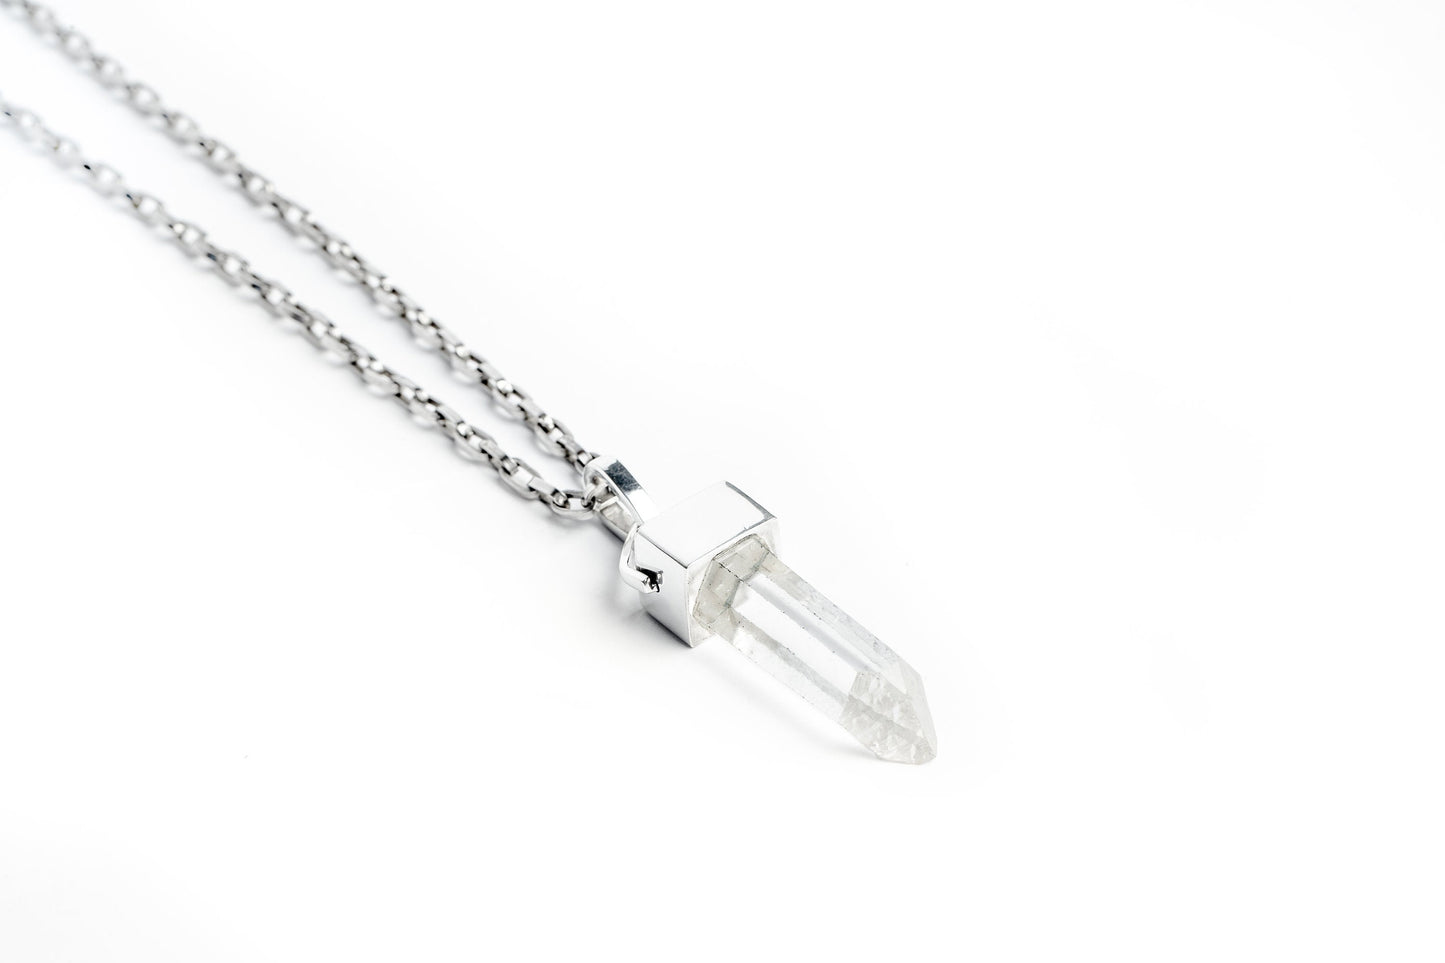 Clear Raw Quartz Point Long Sterling Silver Chain Necklace